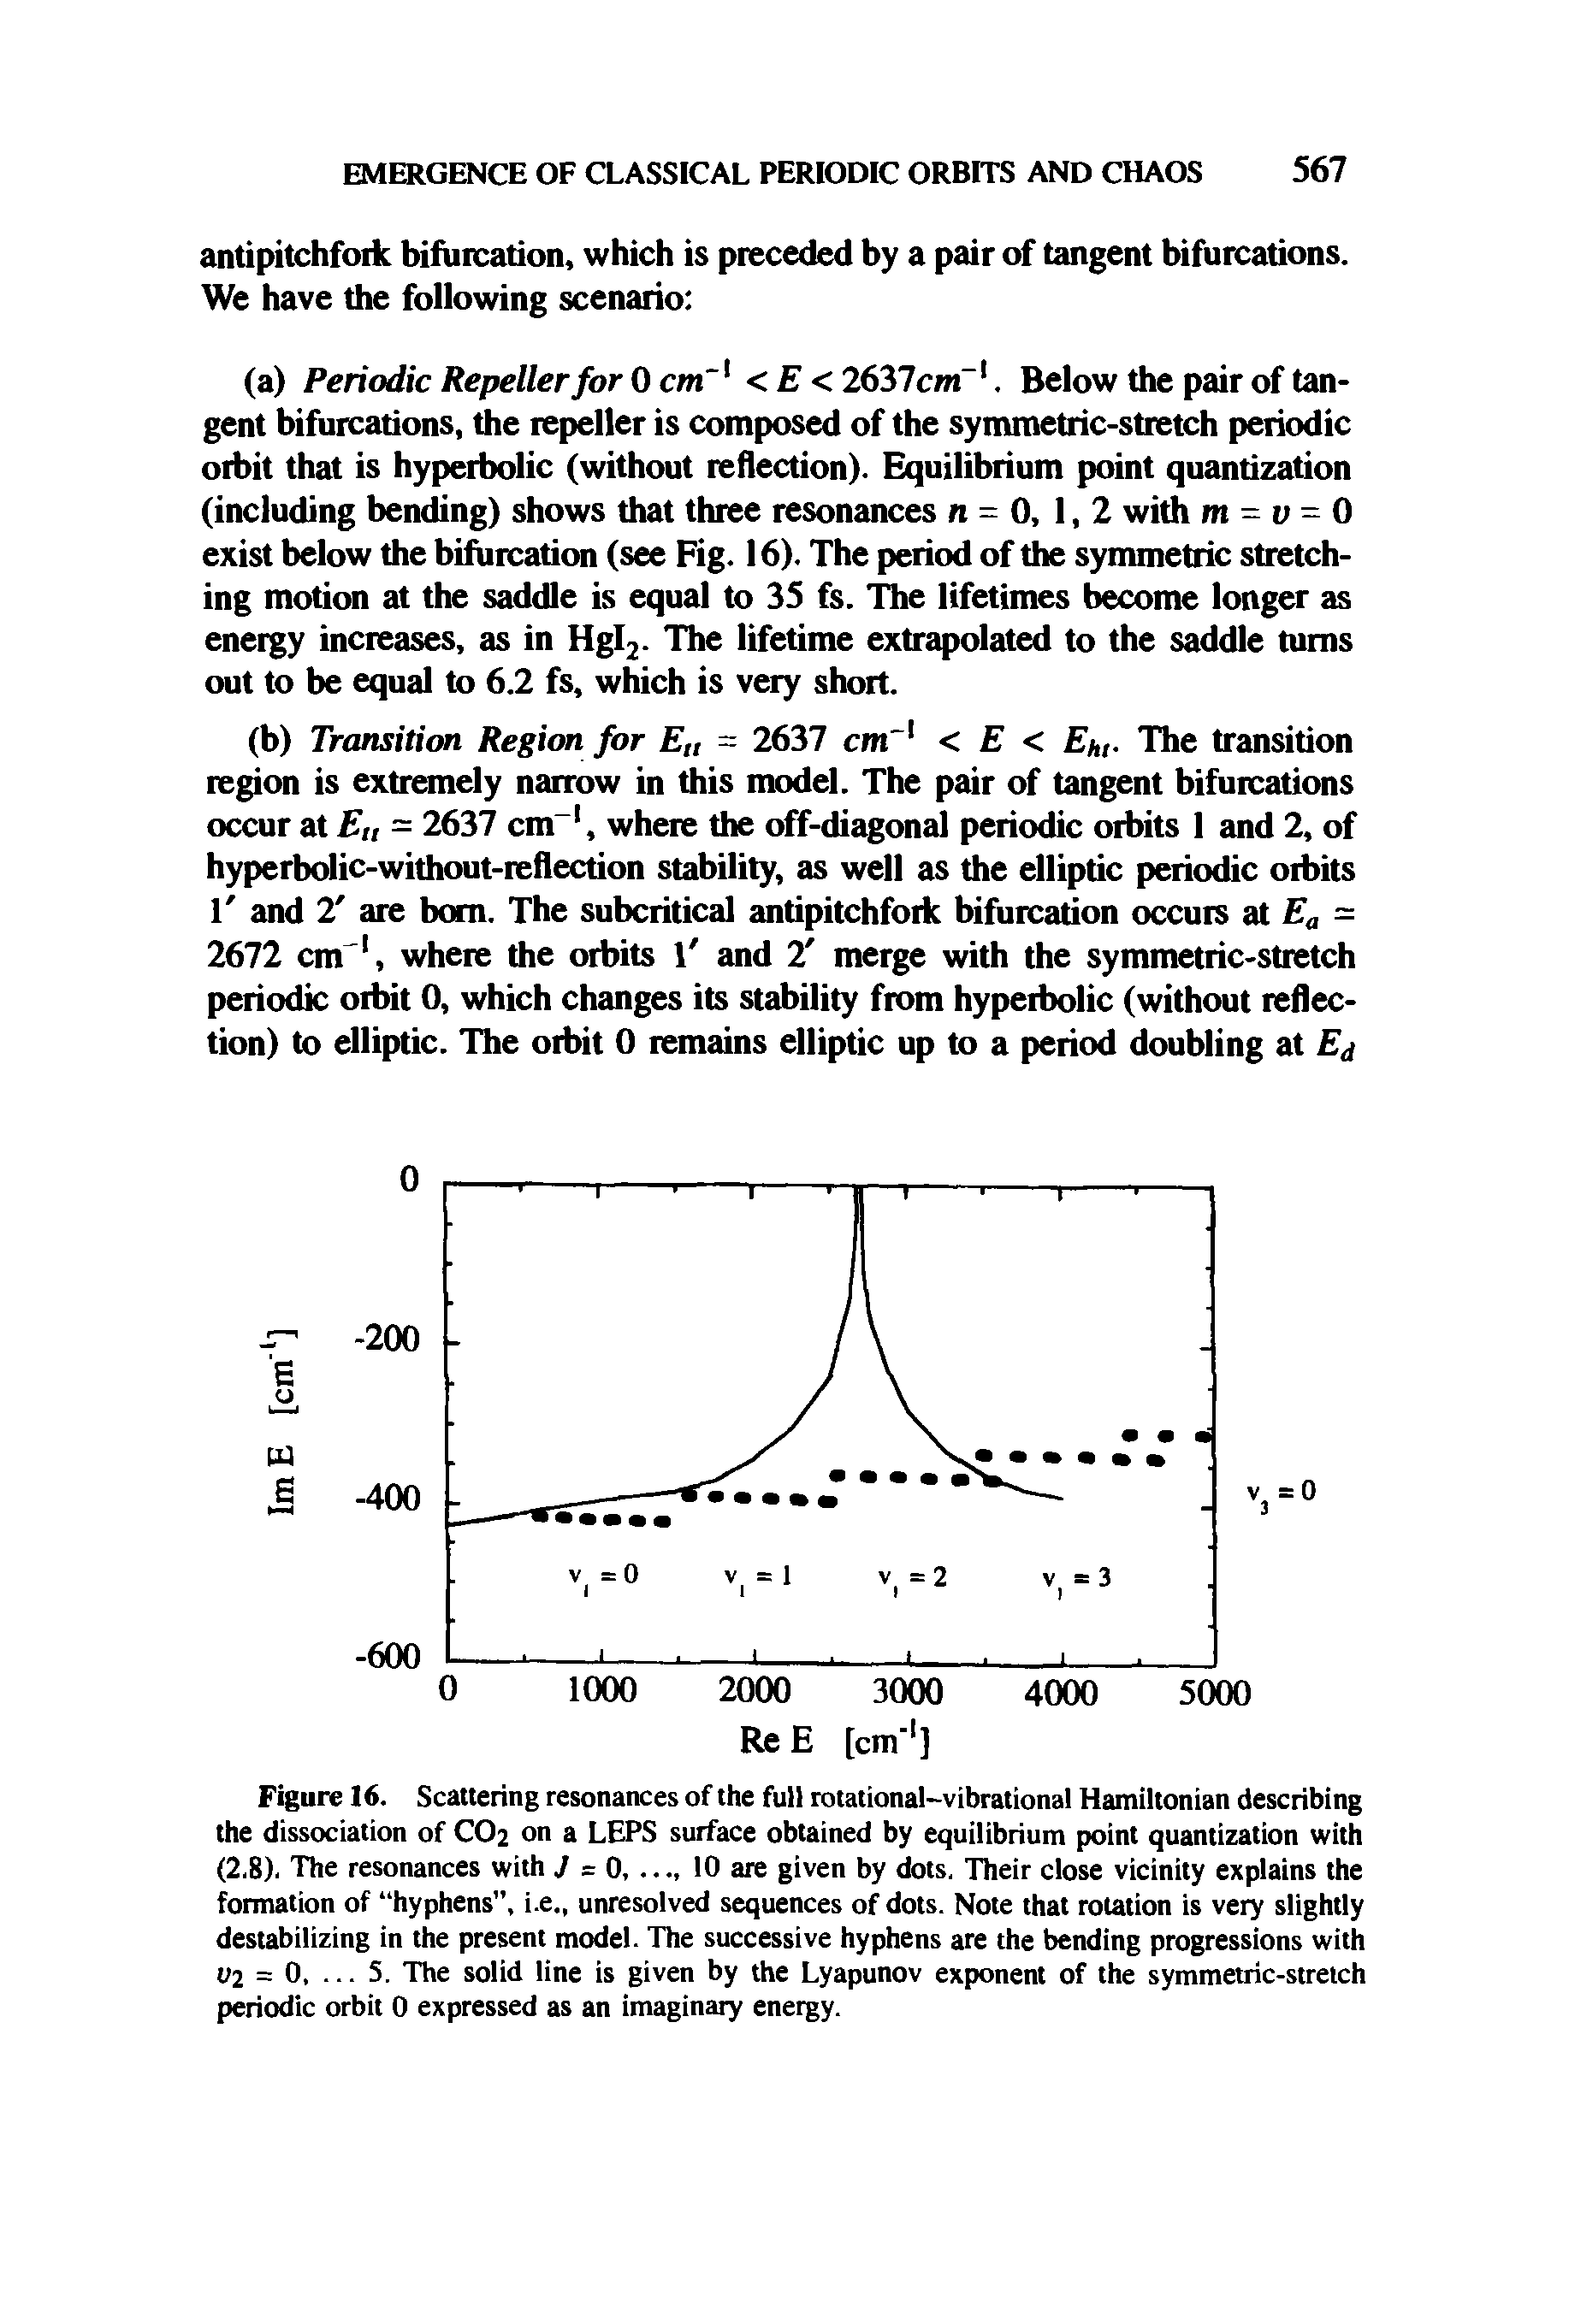 Figure 16. Scattering resonances of the full rotational-vibrational Hamiltonian describing the dissociation of CO2 on a LEPS surface obtained by equilibrium point quantization with (2.8). The resonances with 7 = 0,..., 10 are given by dots. Their close vicinity explains the formation of hyphens , i.e., unresolved sequences of dots. Note that rotation is very slightly destabilizing in the present model. The successive hyphens are the bending progressions with V2 = 0,. .. 5. The solid line is given by the Lyapunov exponent of the symmetric-stretch periodic orbit 0 expressed as an imaginary energy.